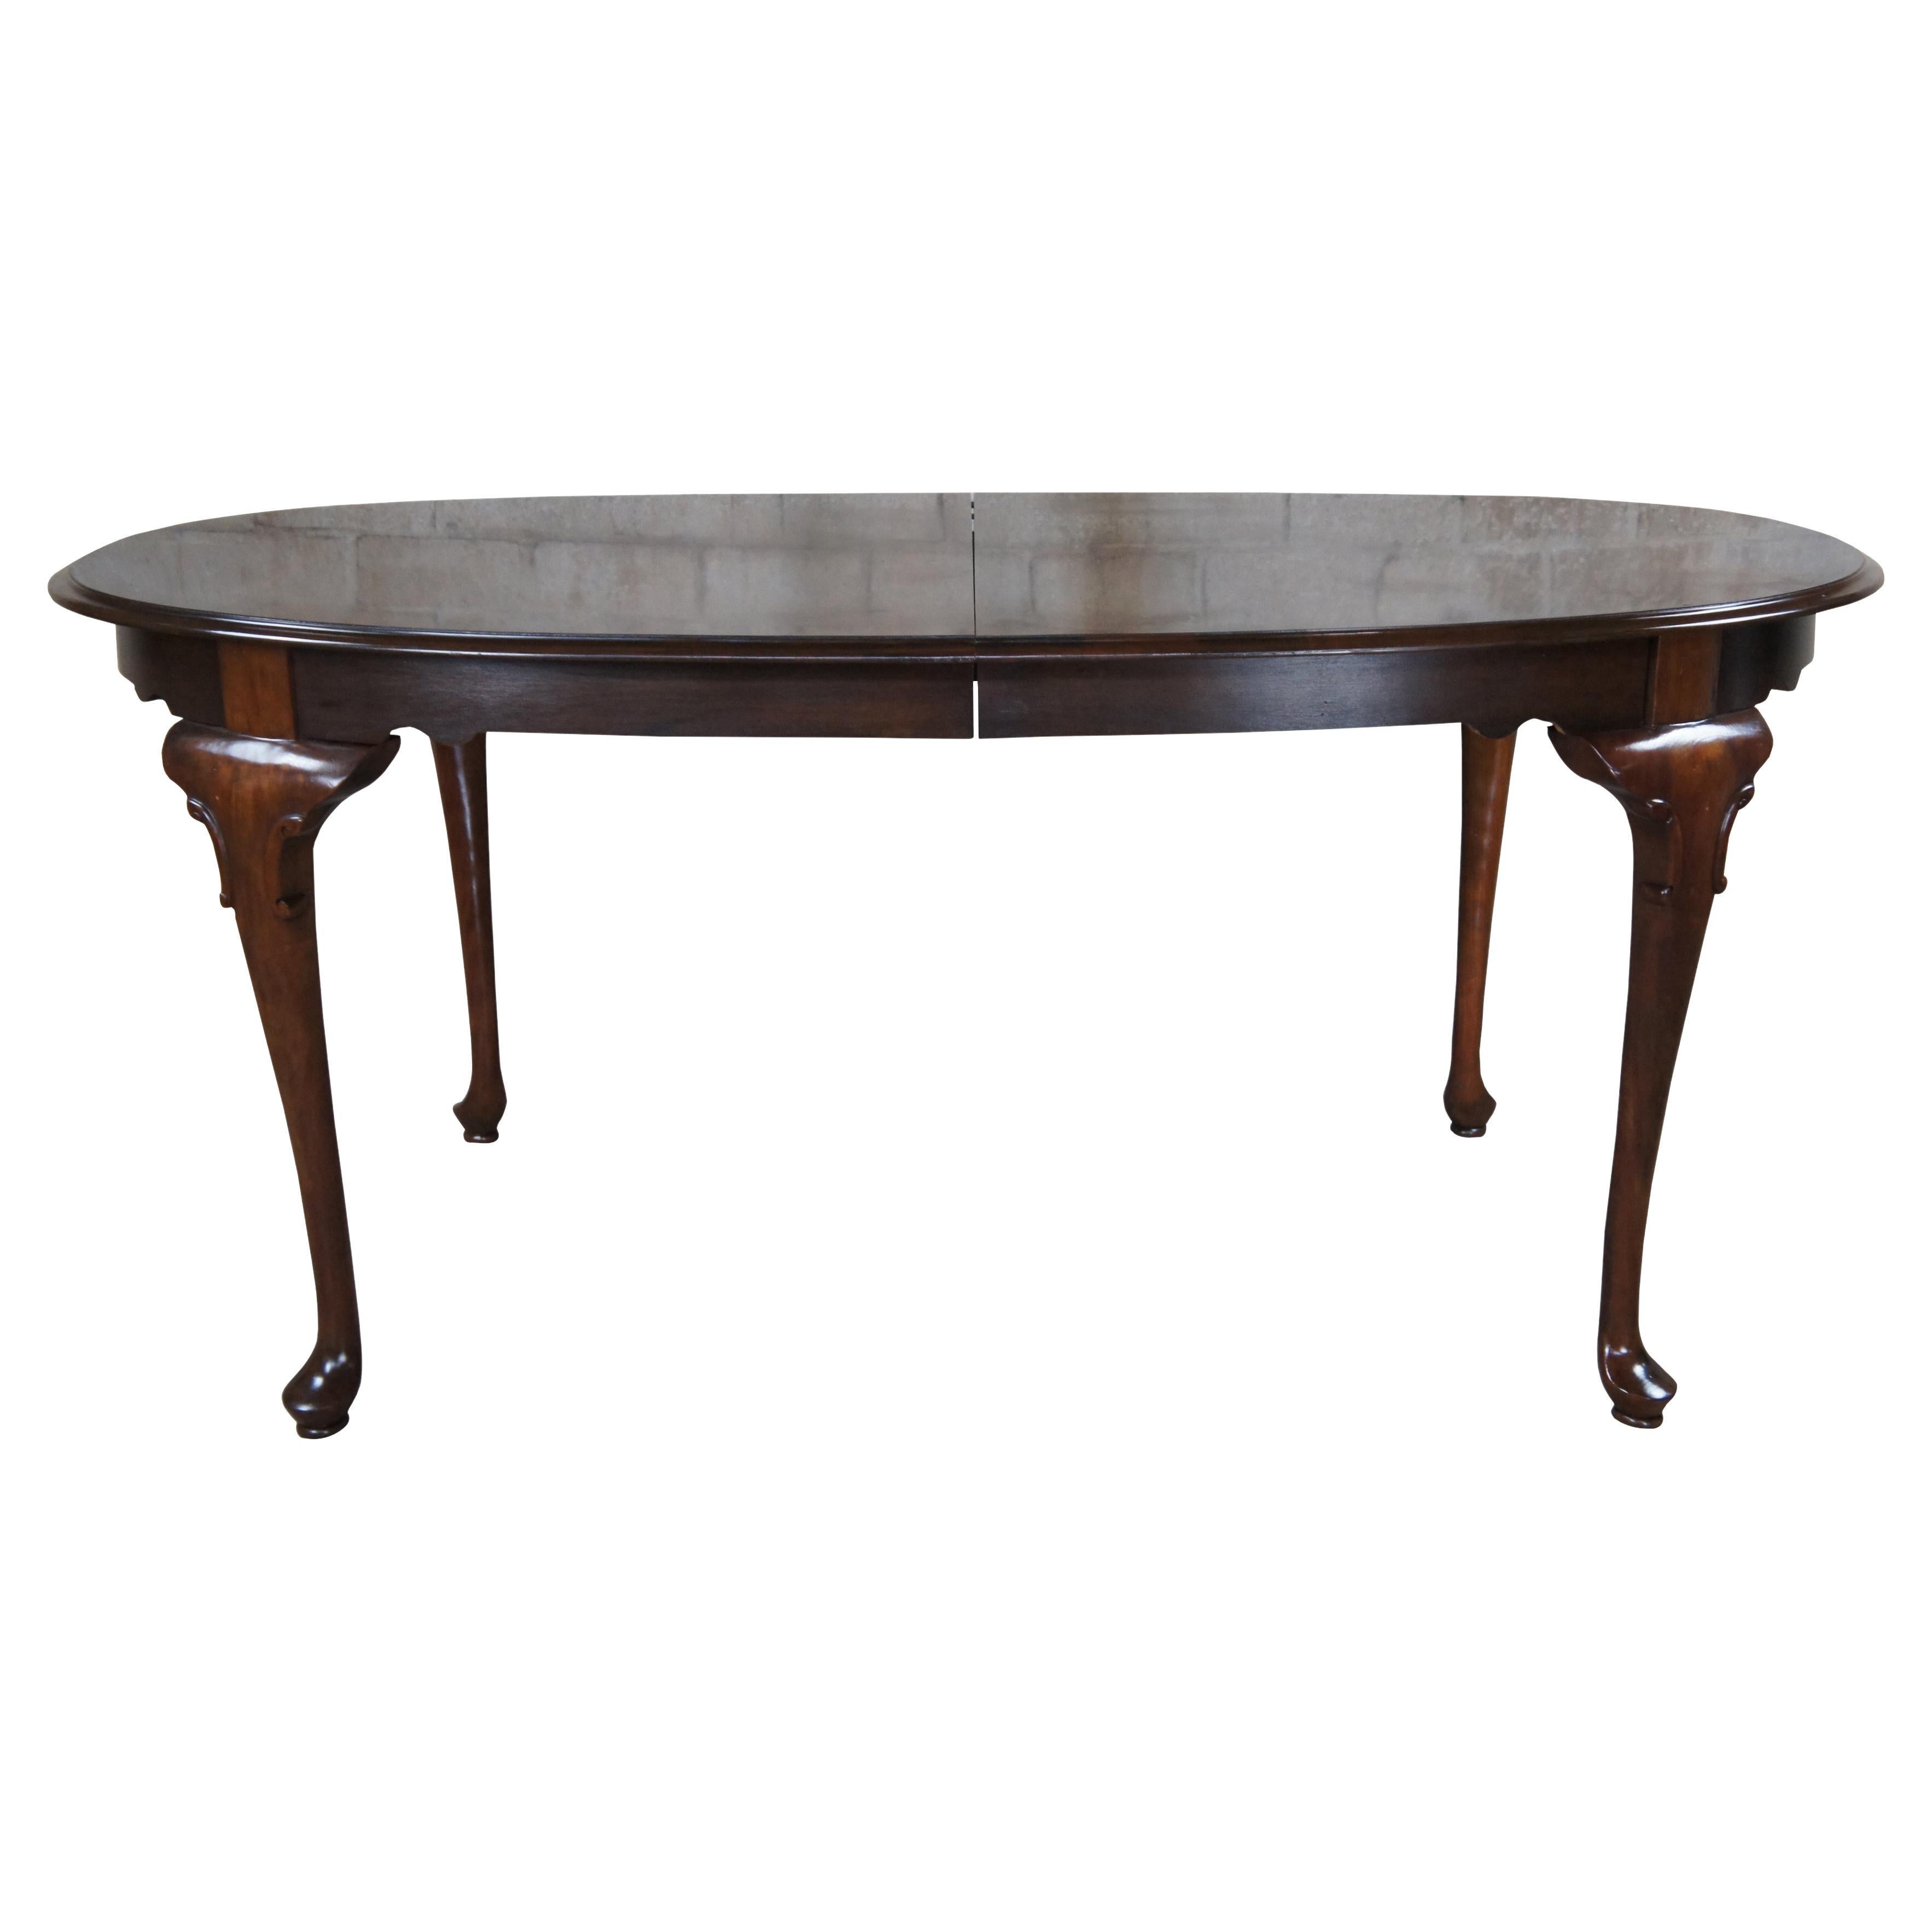 Vintage Ethan Allen Georgian Court Queen Anne Cherry Oval Dining Table 11-6214